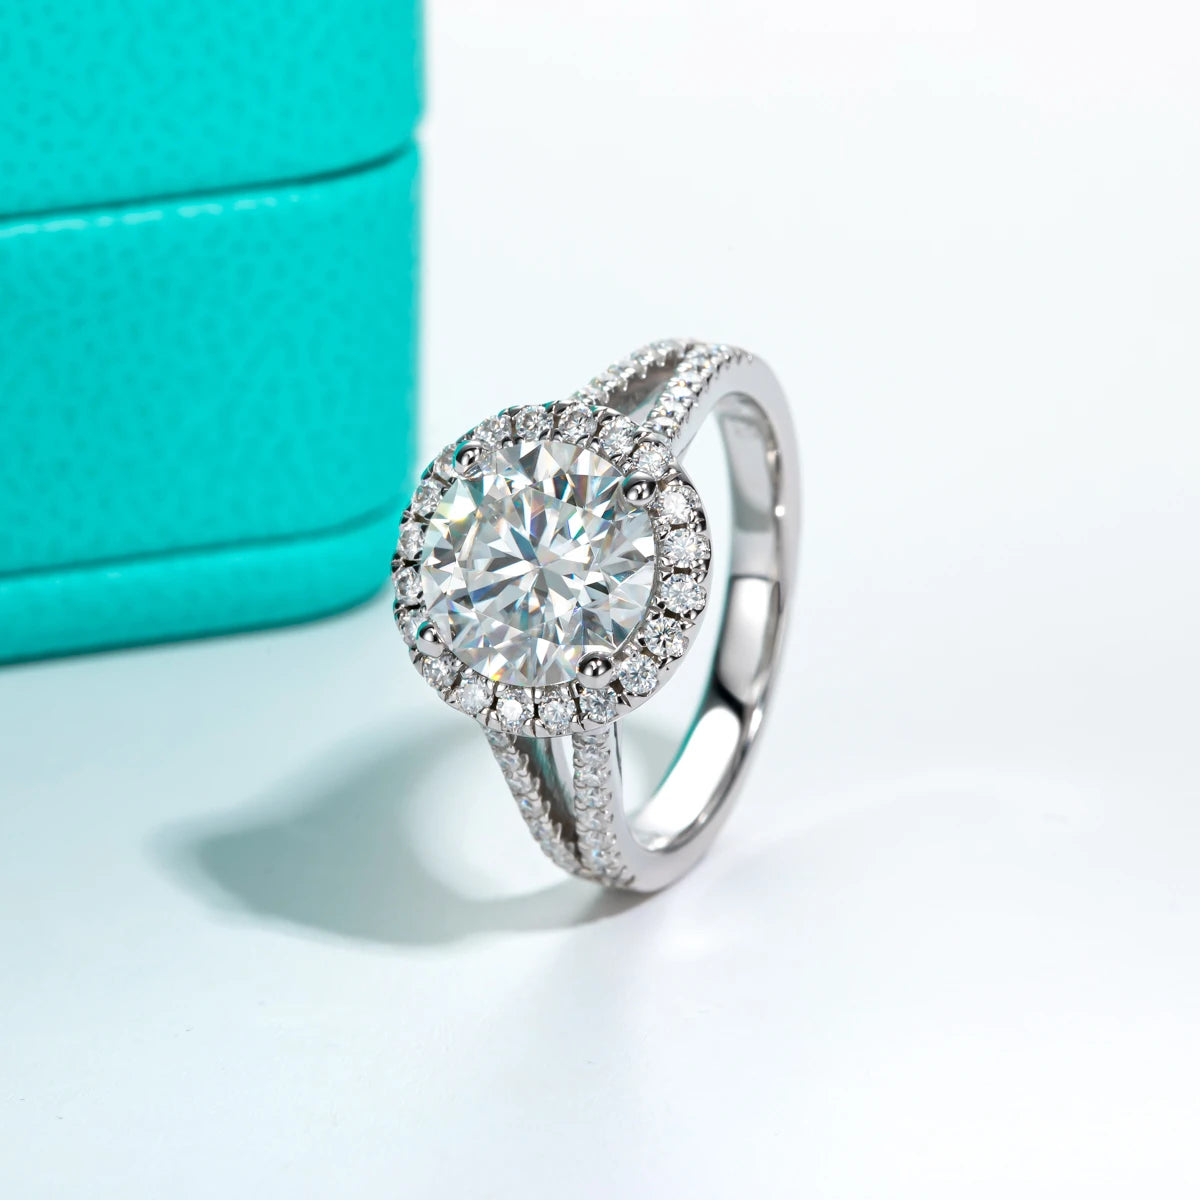 Moissanite Halo Engagement Rings: Stunning Beauty & Affordability